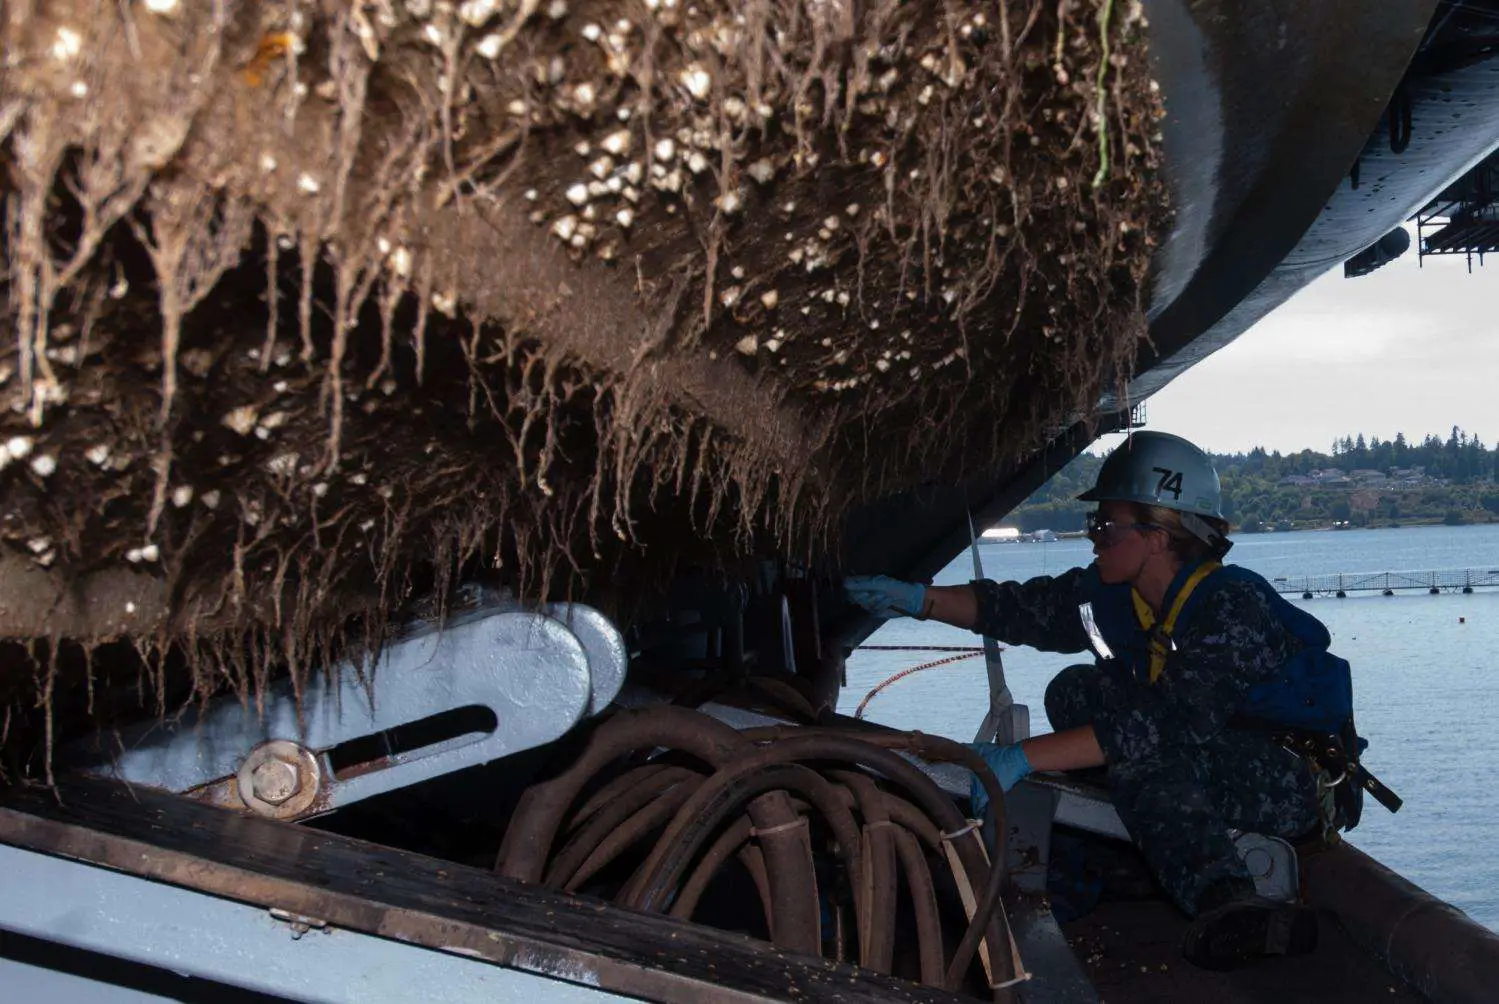 Barnacle busting: Research targets ship biofouling